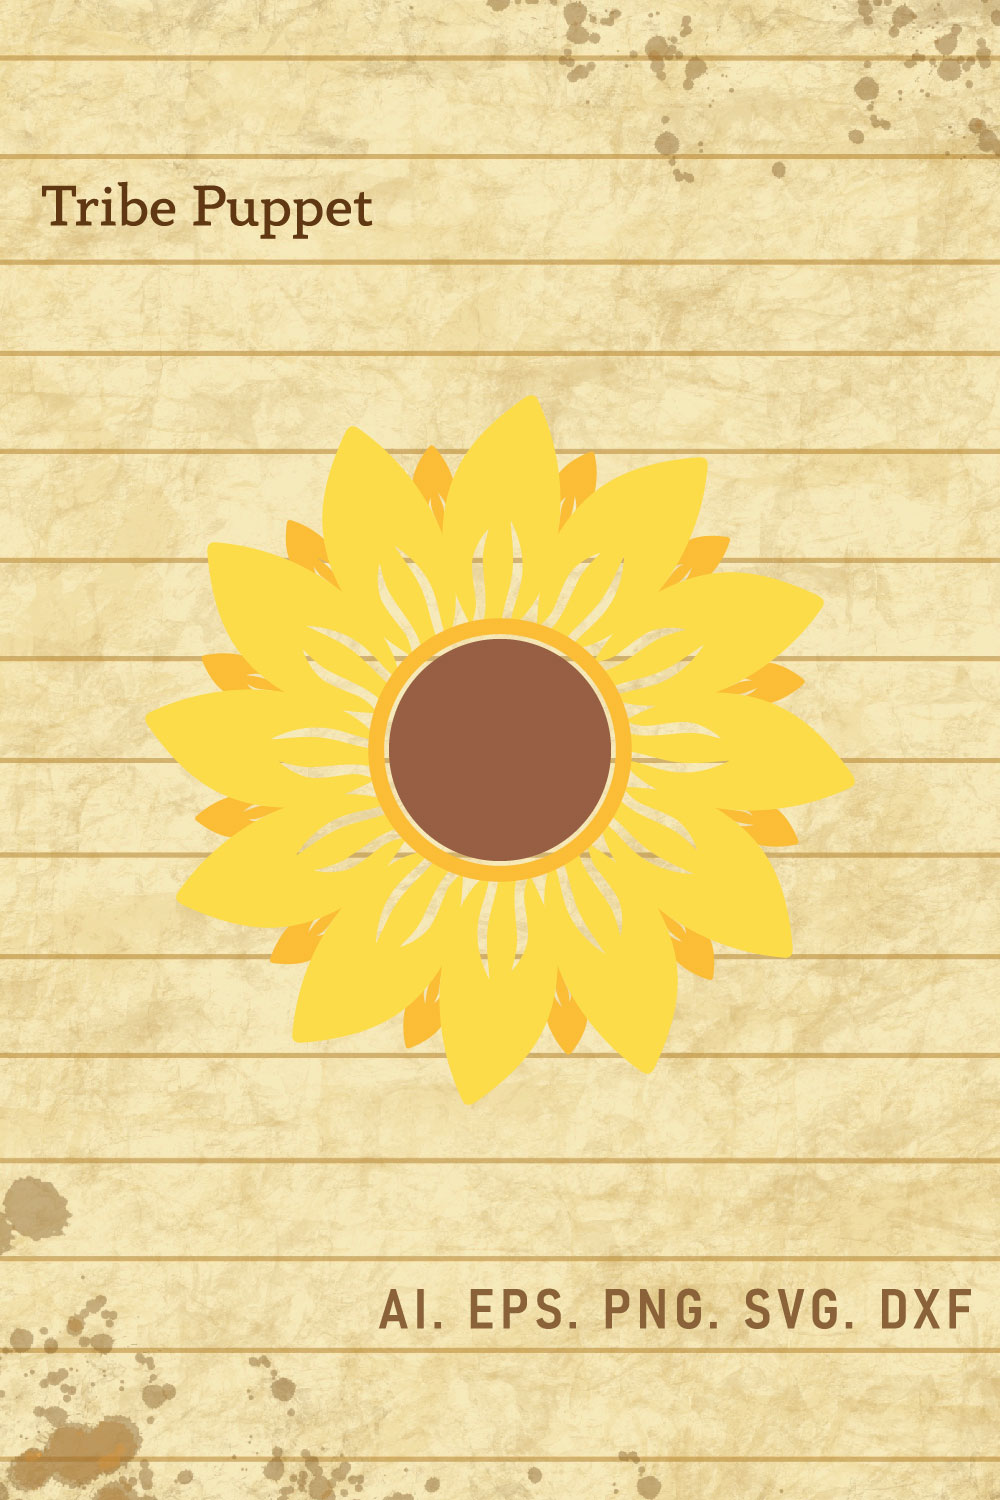 Sunflower 9 pinterest preview image.